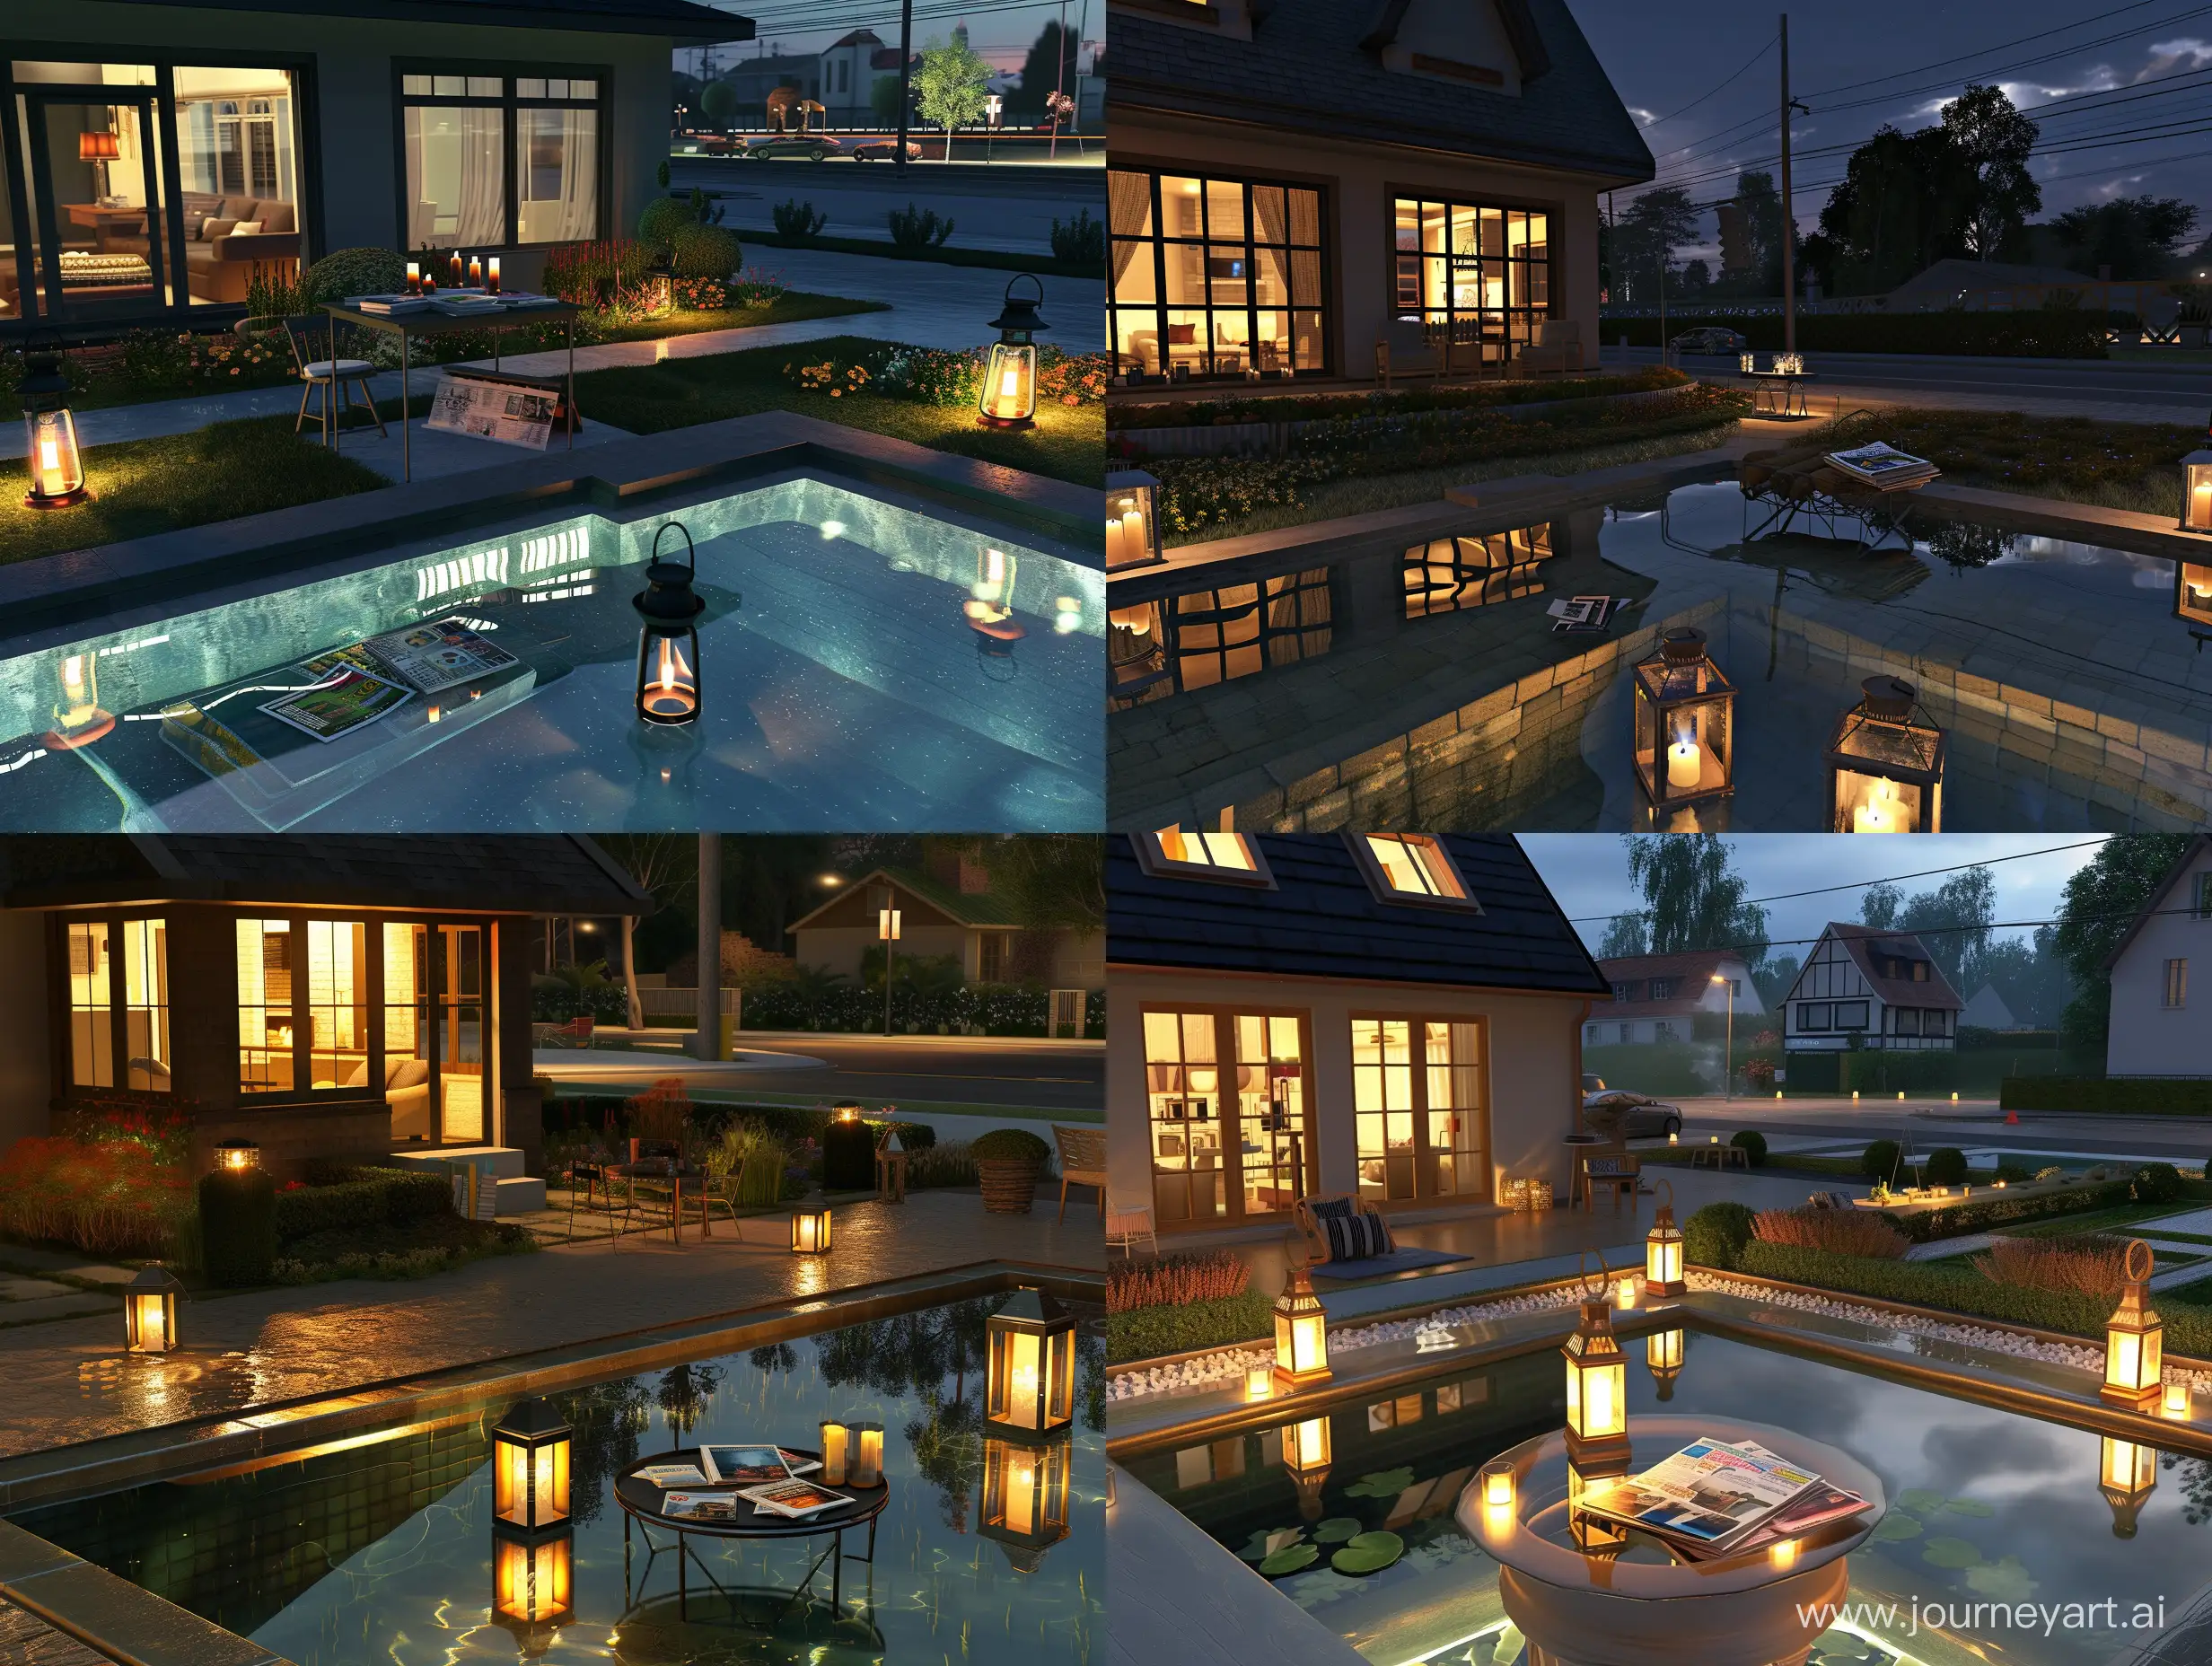 Starry-Night-by-the-Poolside-American-Style-House-with-Gardens